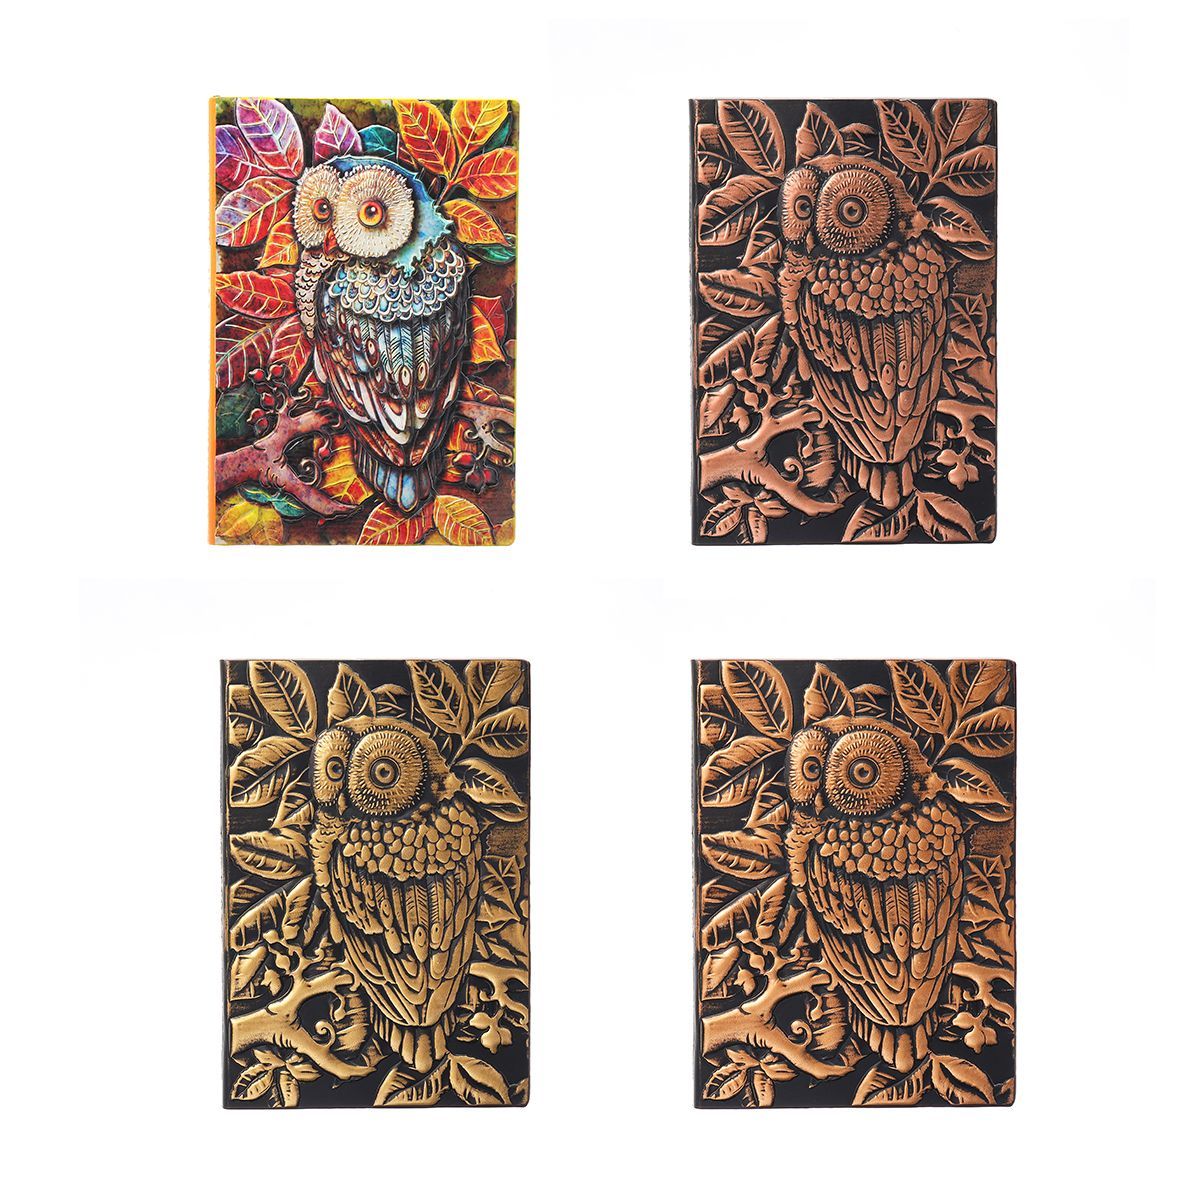 Handmade-Vintage-3D-Embossed-Owl-Travel-Diary-Notebook-Journal-Leather-Notepad-1528173